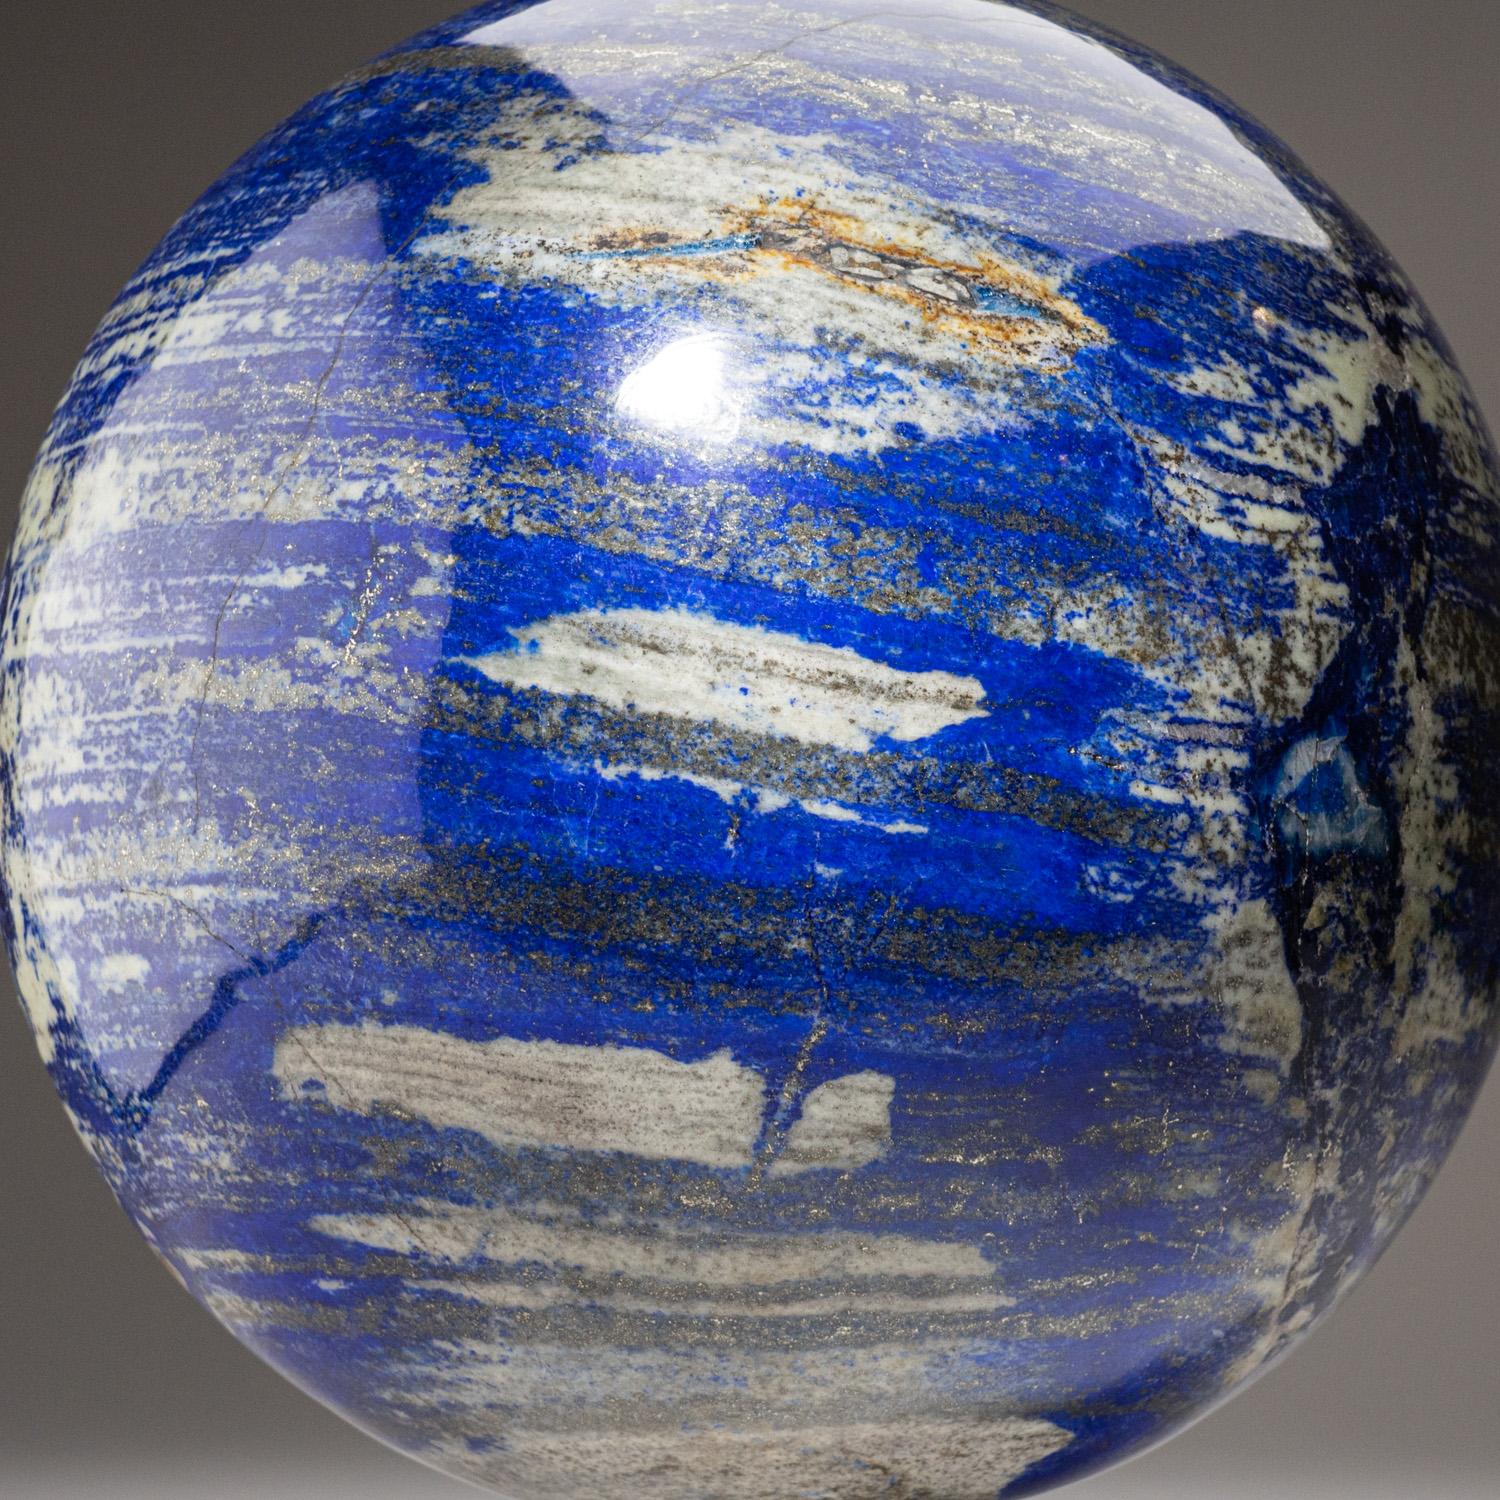 Contemporary Genuine Polished Lapis Lazuli Sphere from Afghanistan (12